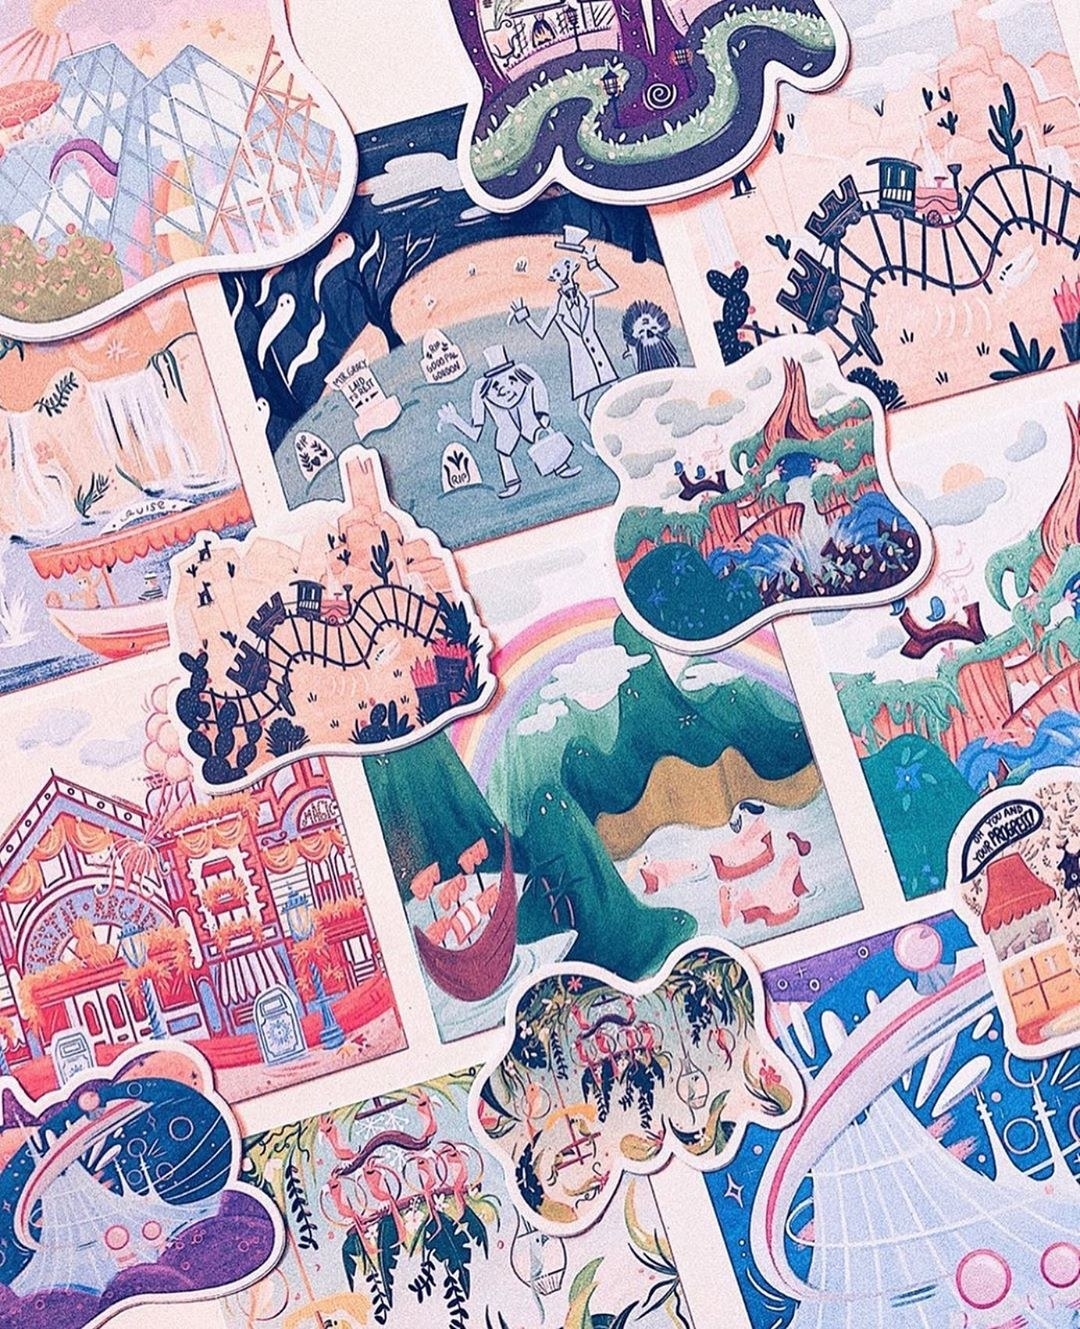 a layout of various illustrated disney locations as art prints and stickers